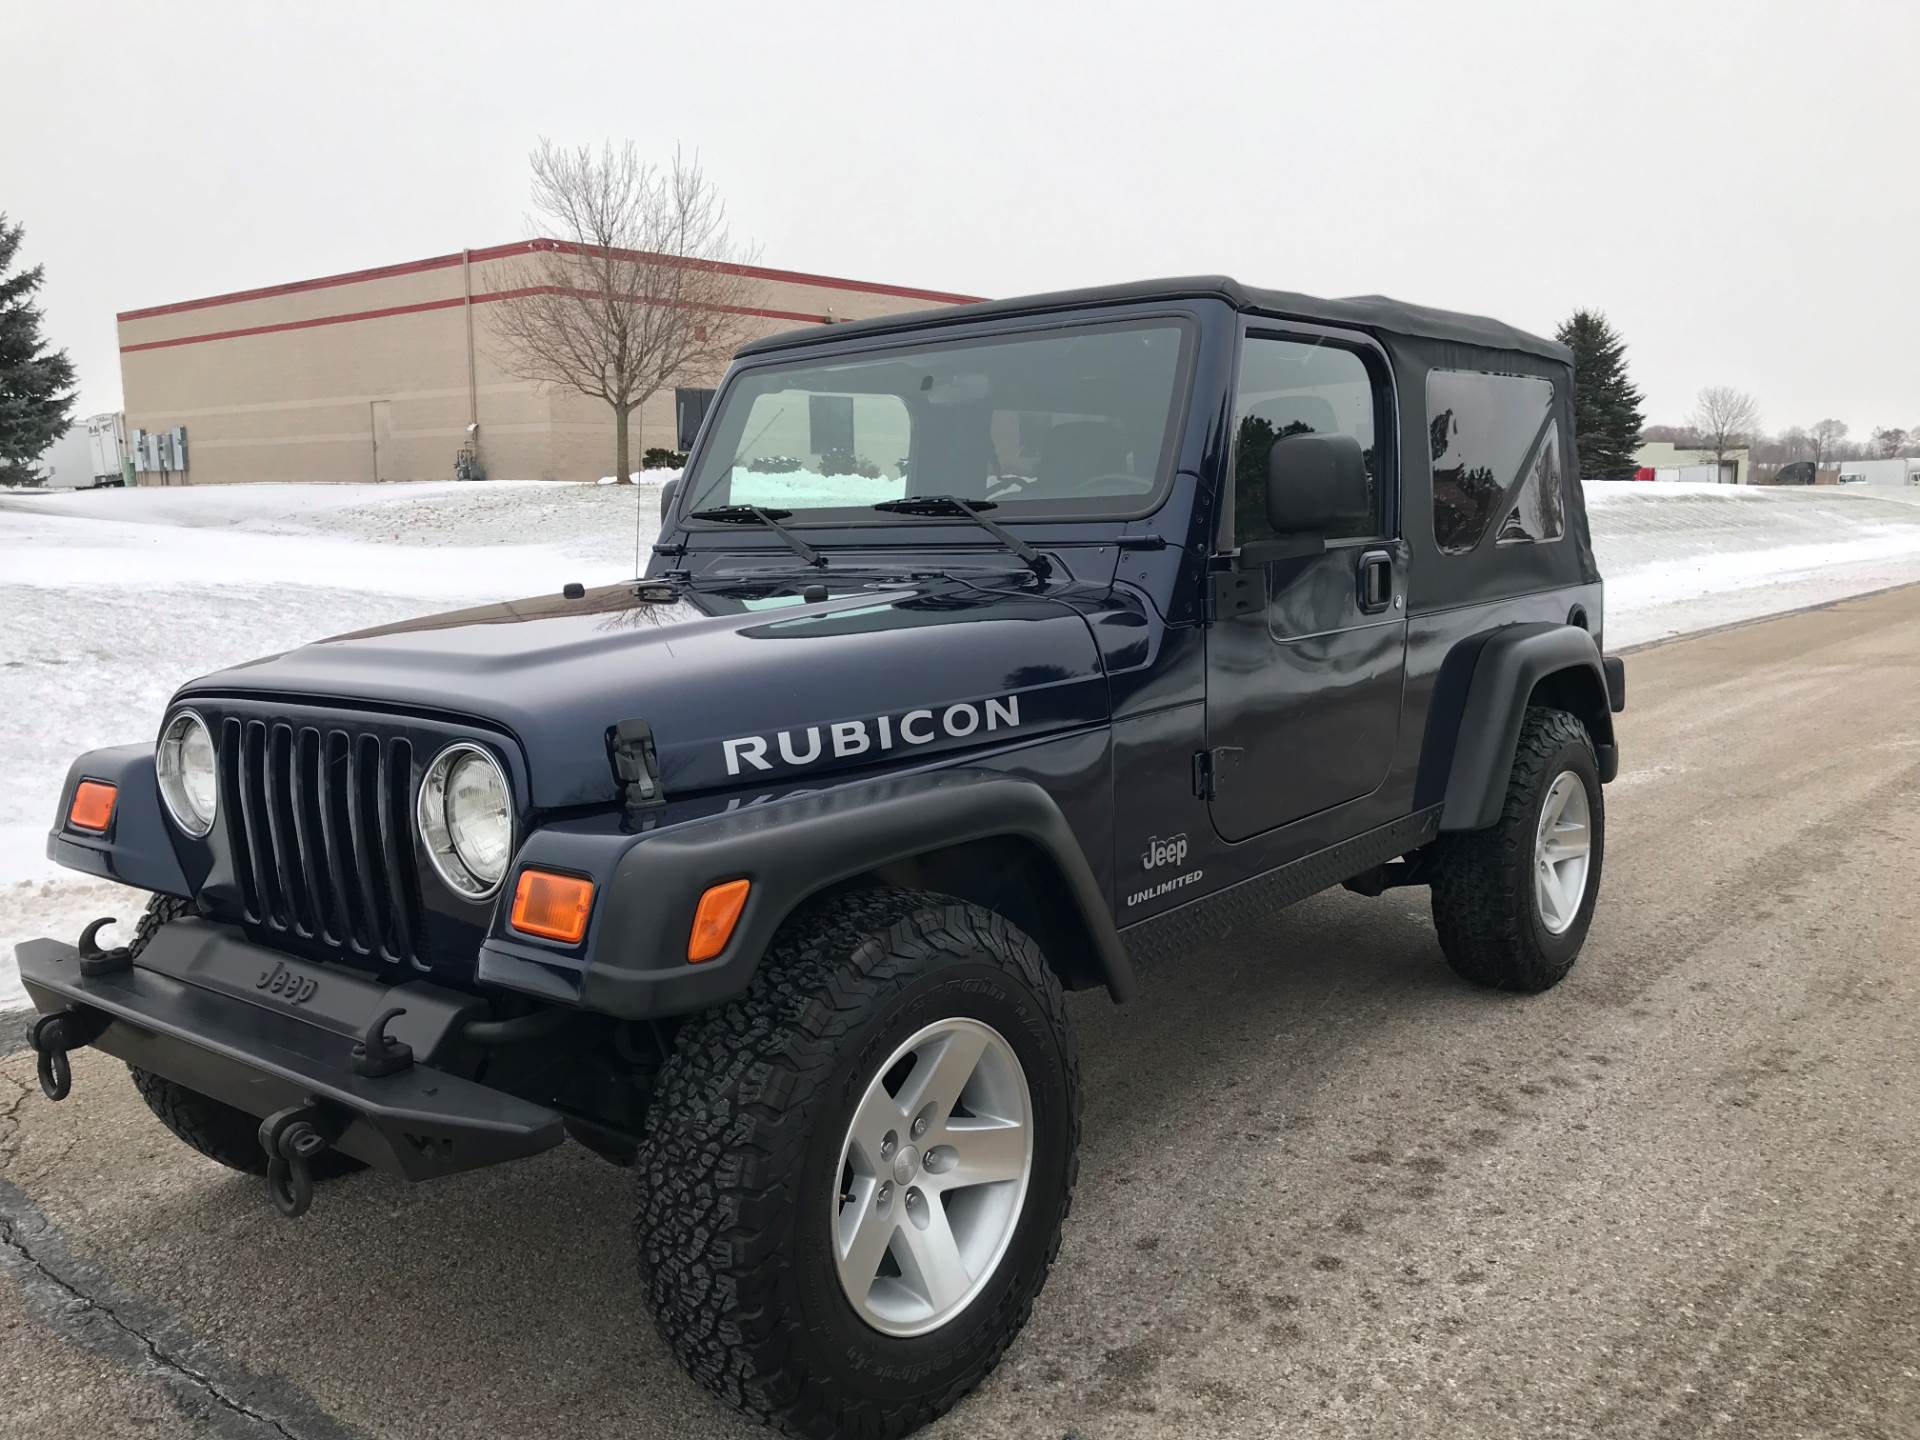 2006 Jeep Wrangler Unlimited Rubicon 2dr SUV 4WD in Big Bend, Wisconsin - Photo 115